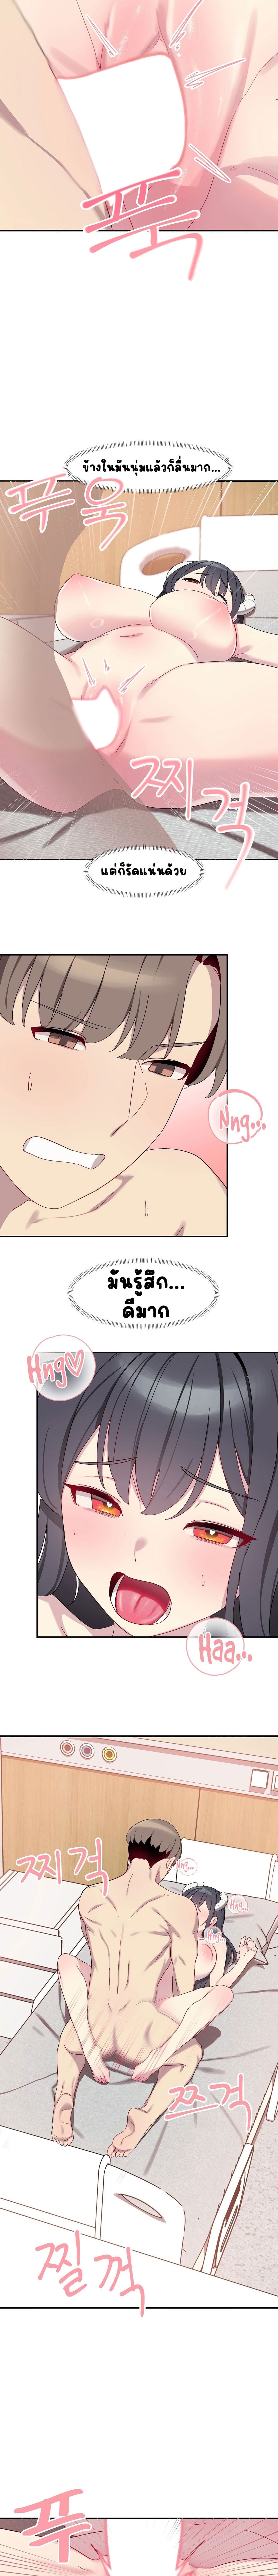 Hospitalized Life in Another World ตอนที่ 5 ภาพ 6